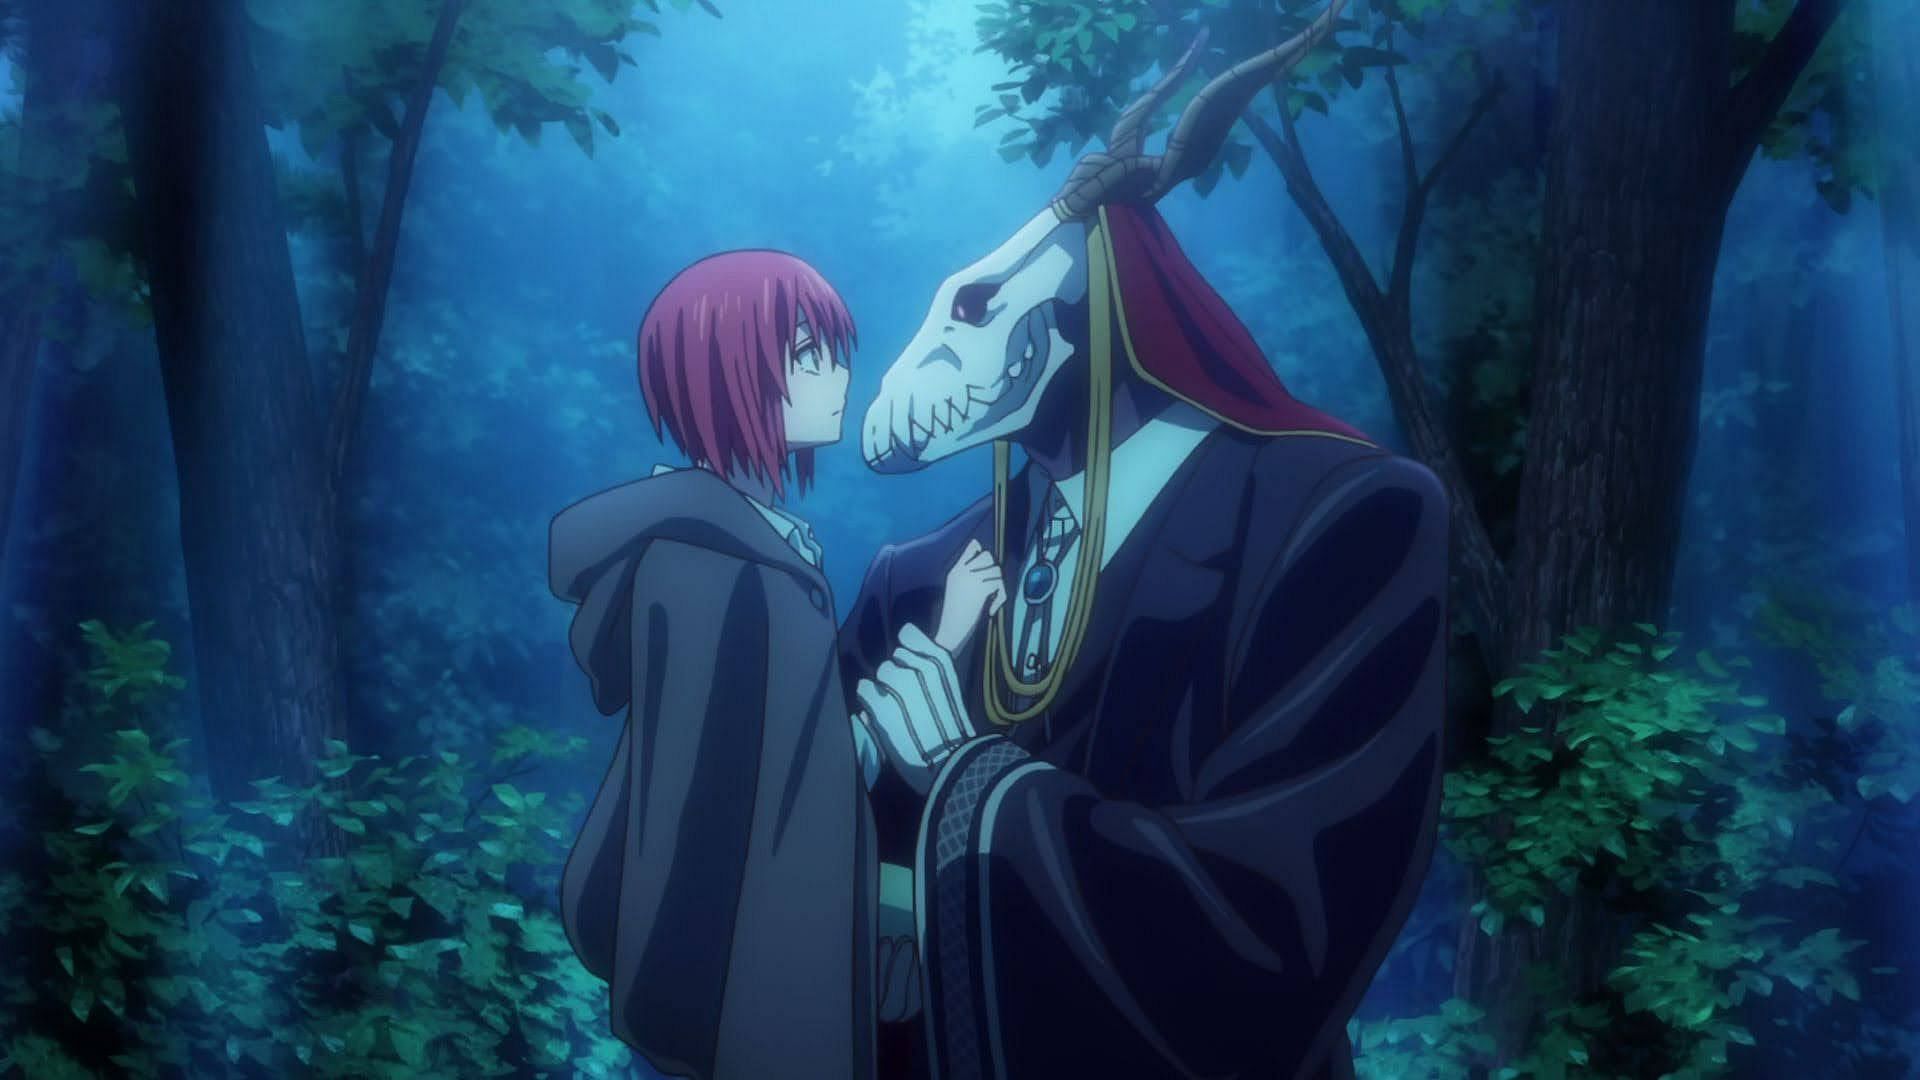 Chise and Elias